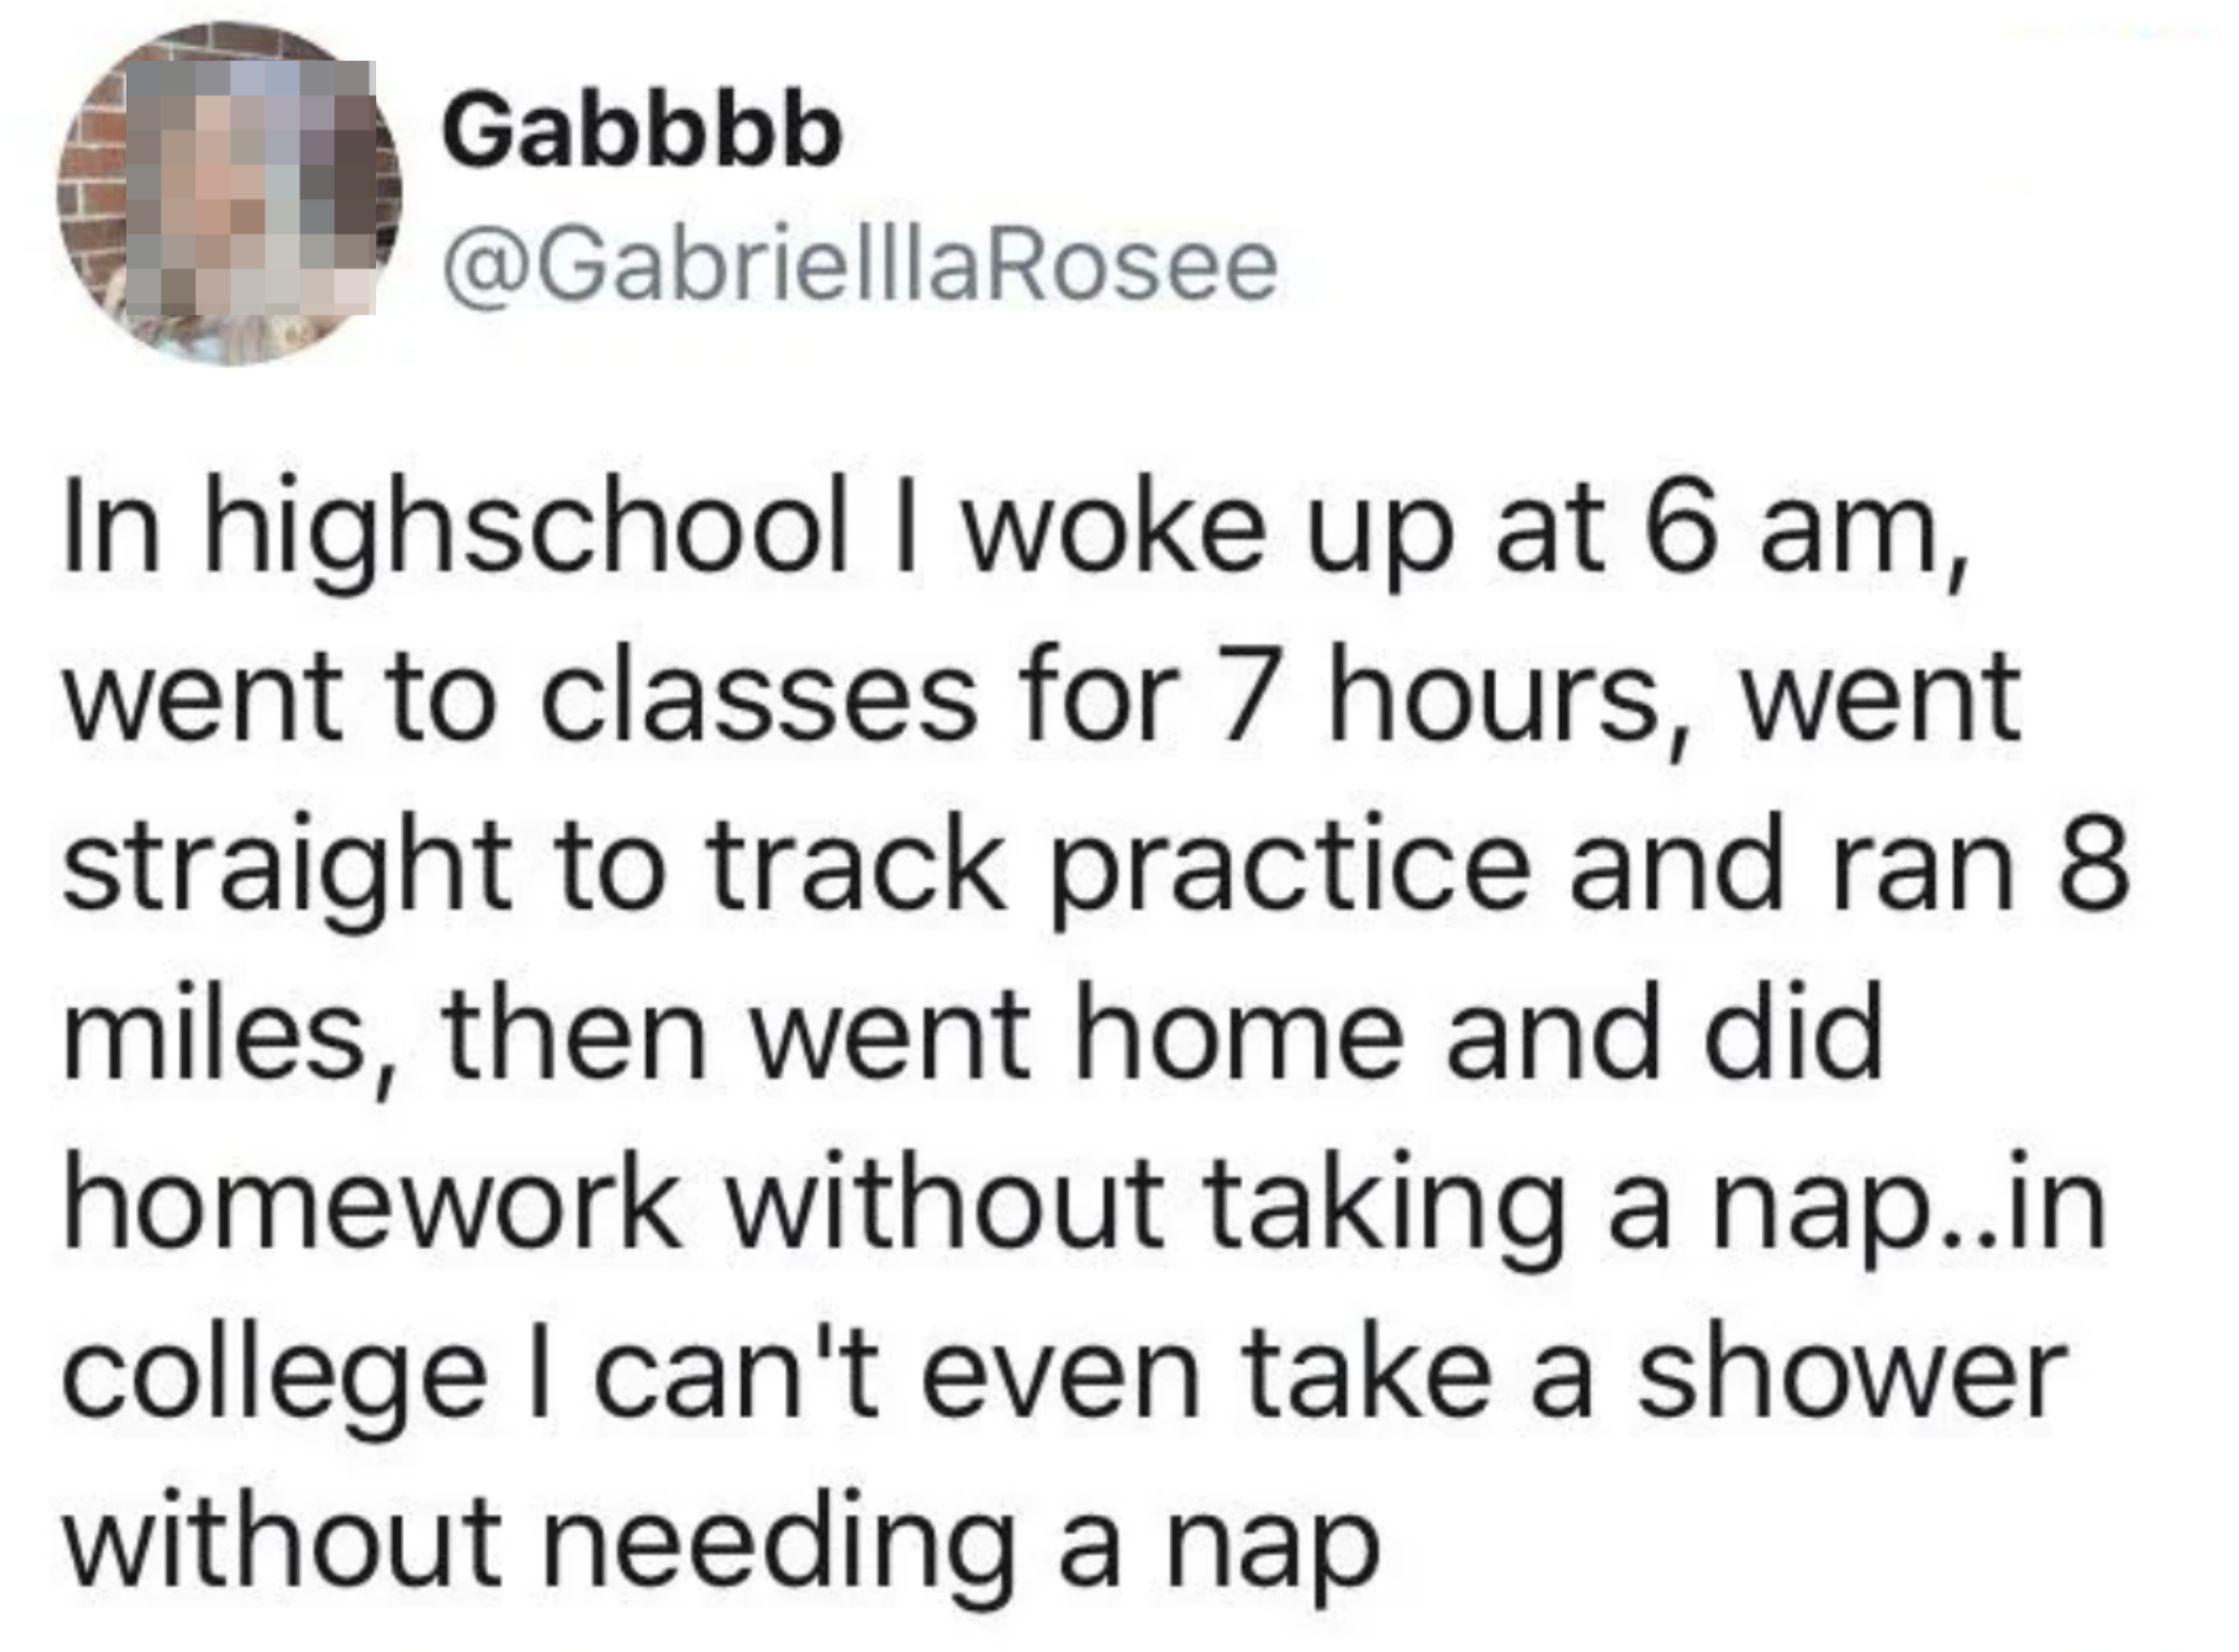 Tweet by user GabbbbRosee sharing a memory of high school productivity versus college fatigue, unable to take a shower